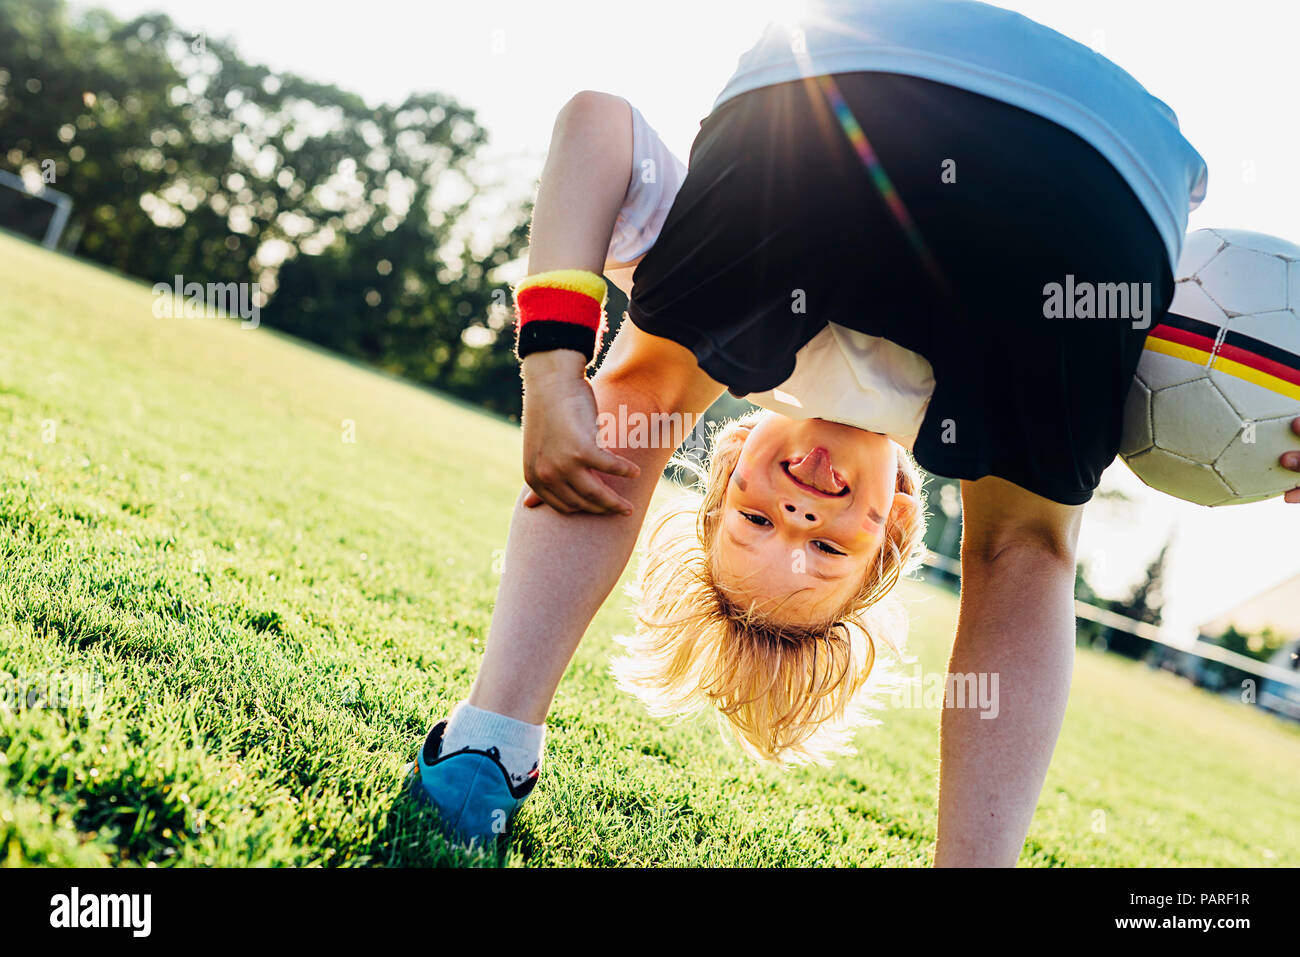 Boy on soccer field, bending over, looking through his legs Stock Photo